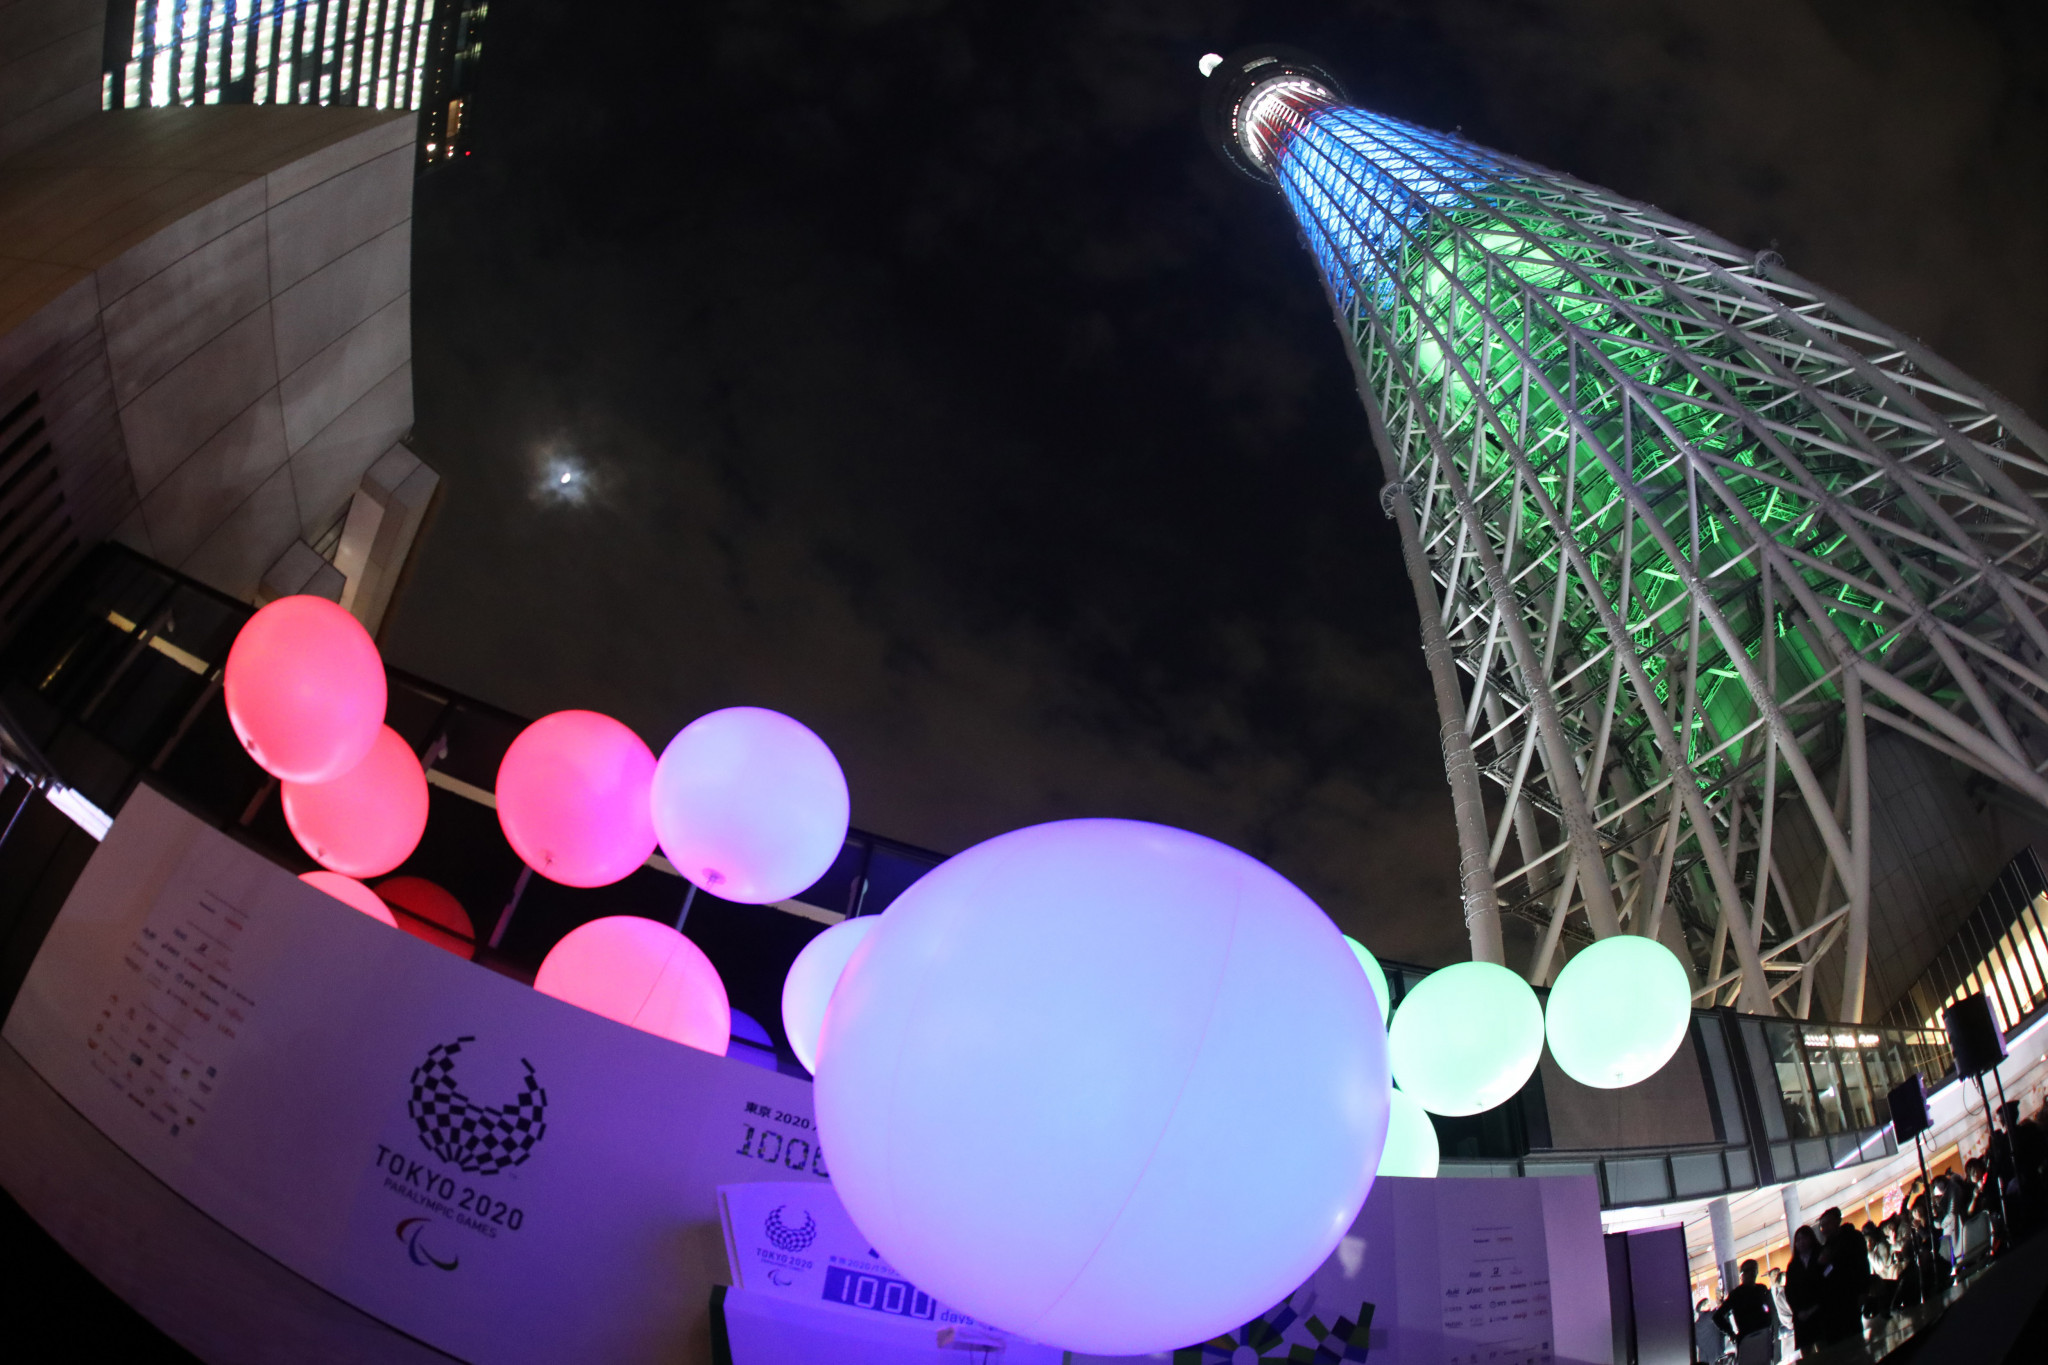 Tokyo 2020 stage event to mark 1,000 days to go to Paralympic Games